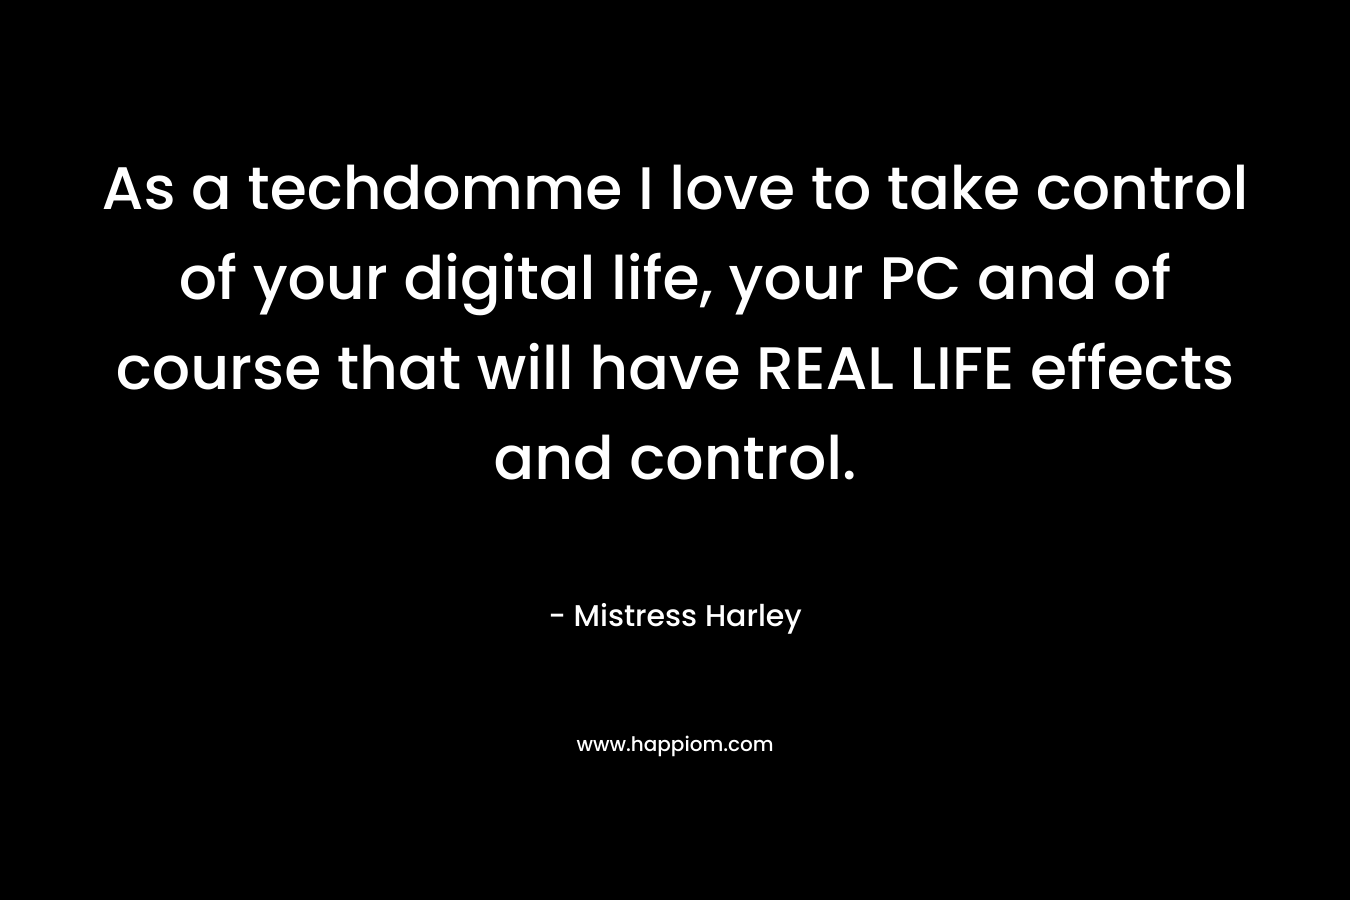 As a techdomme I love to take control of your digital life, your PC and of course that will have REAL LIFE effects and control. – Mistress Harley